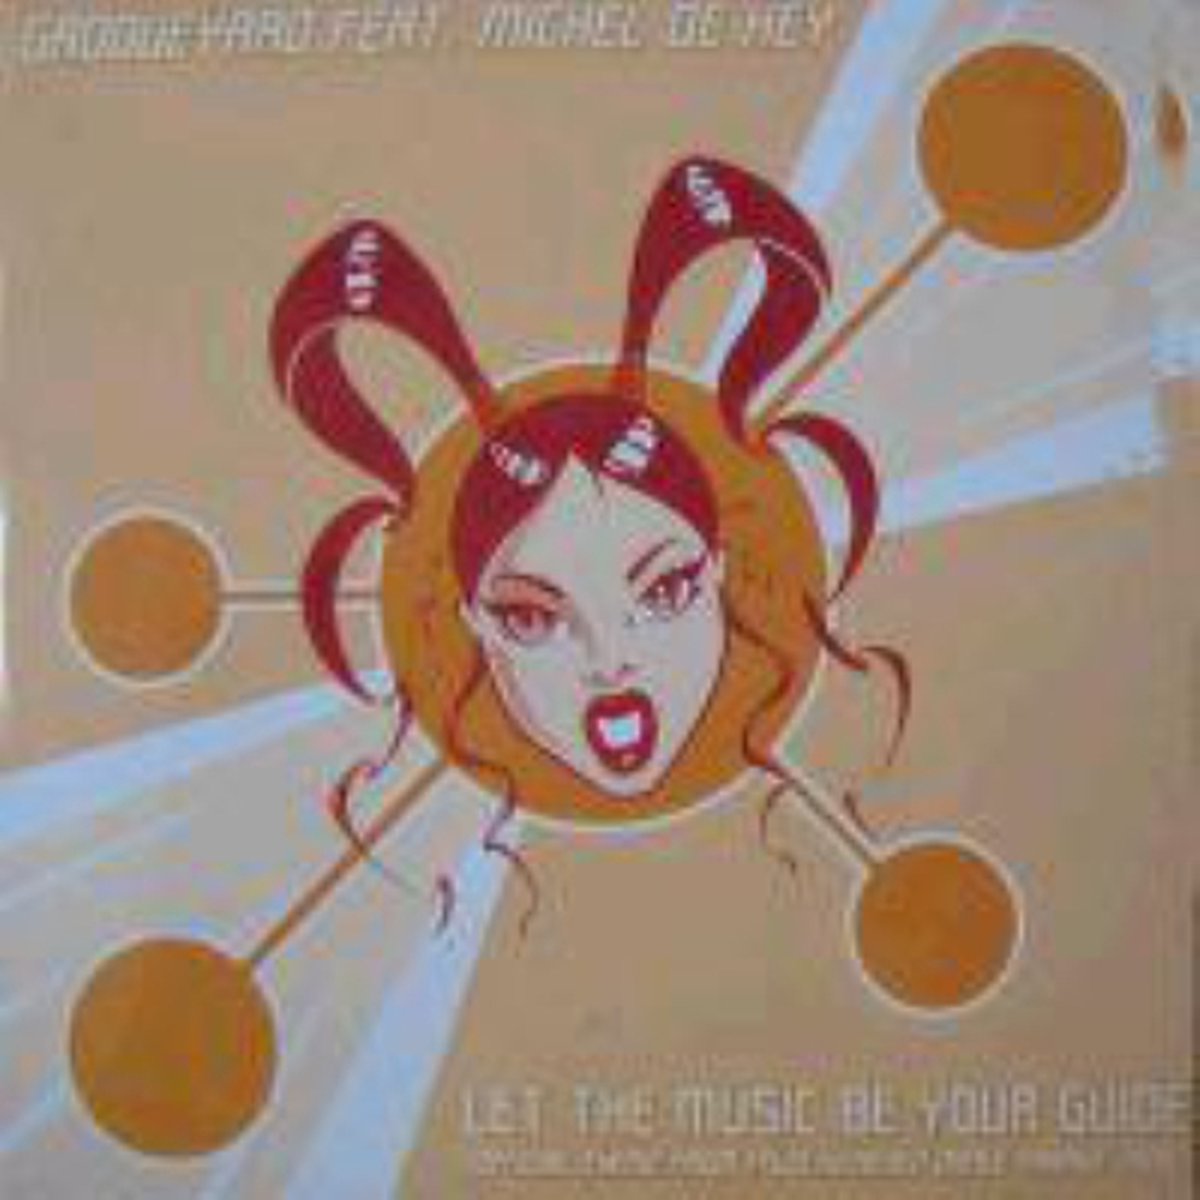 Let The Music Be Your Guide - Grooveyard Featuring Michel De Hey